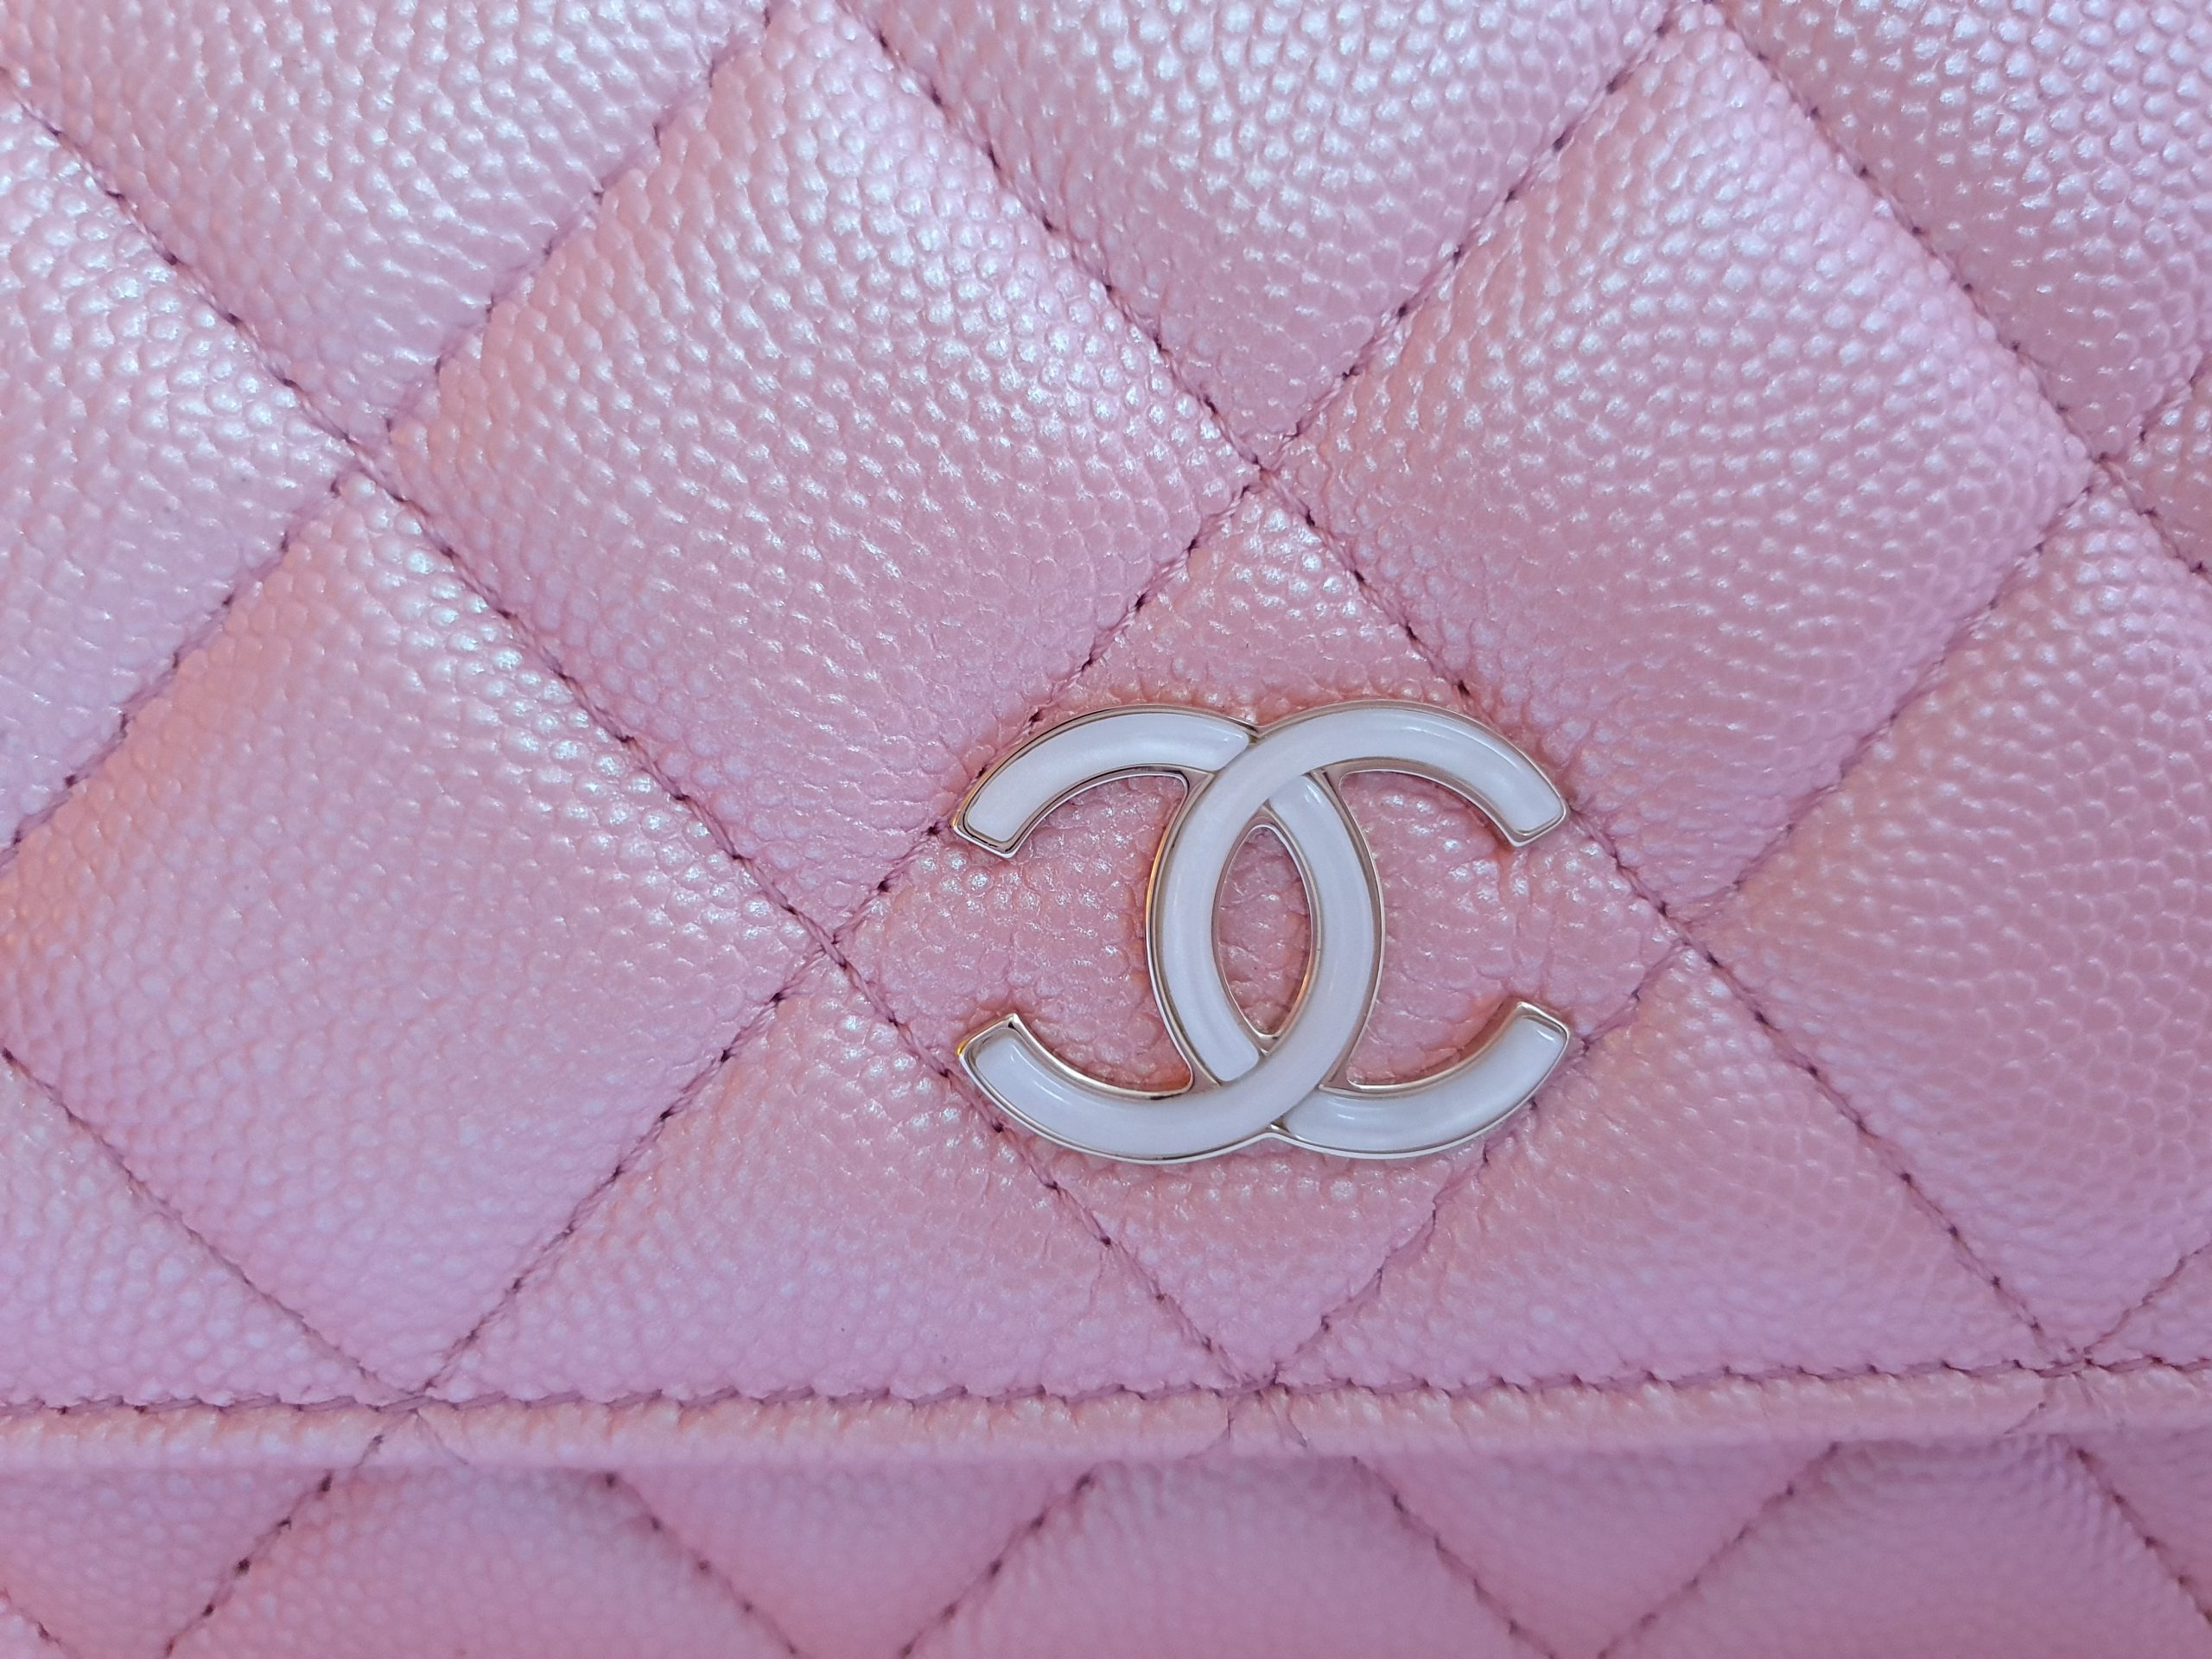 Chanel 19S Iridescent Pink Wallet on Chain Bag - Seeking Perfect